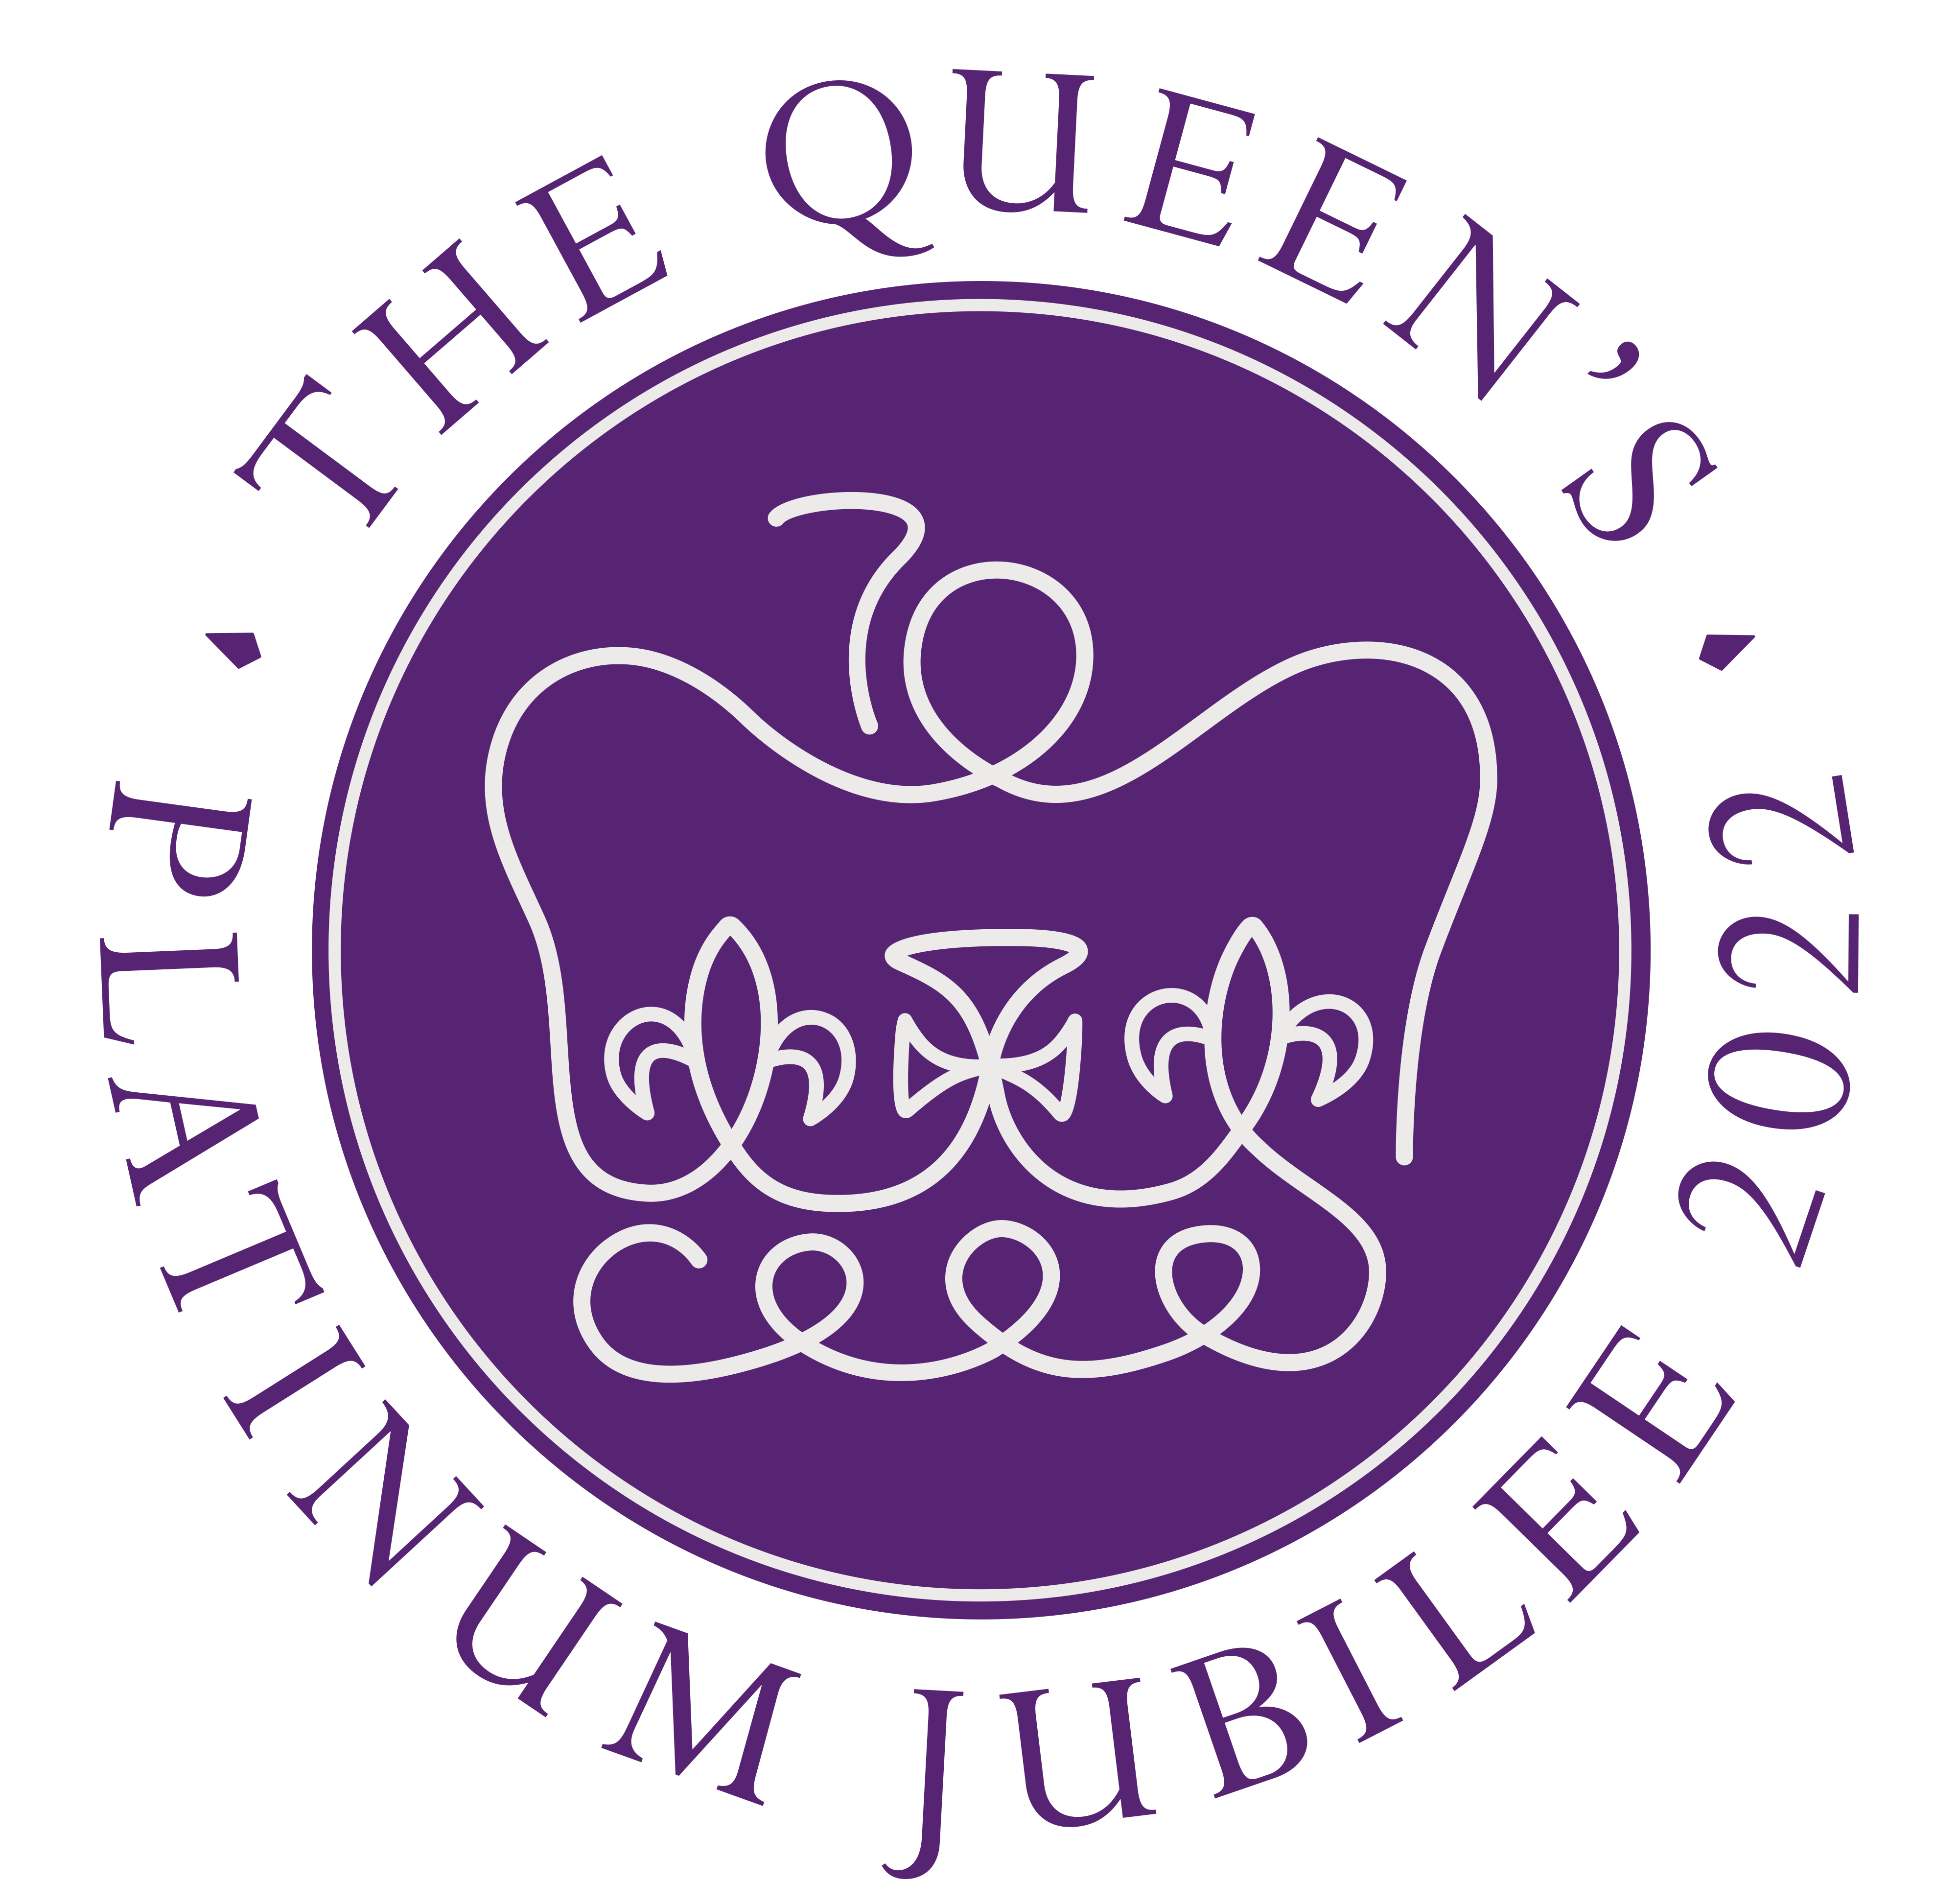 Stockport celebrates Her Majesty The Queen’s Platinum Jubilee